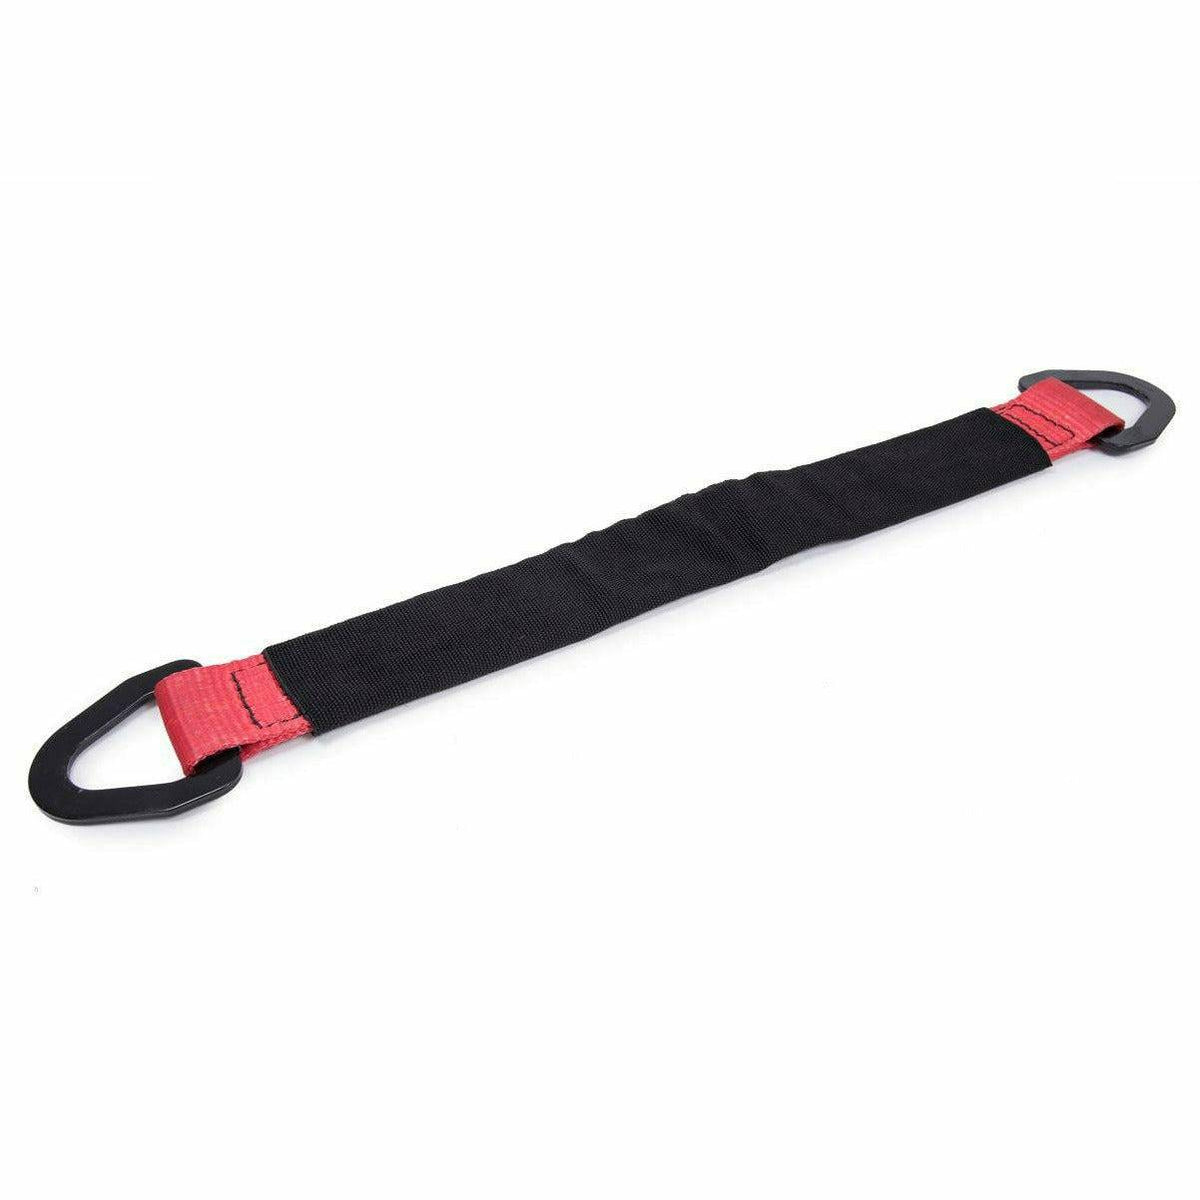 Speed Strap 2"x24" Axle Strap with D-Rings